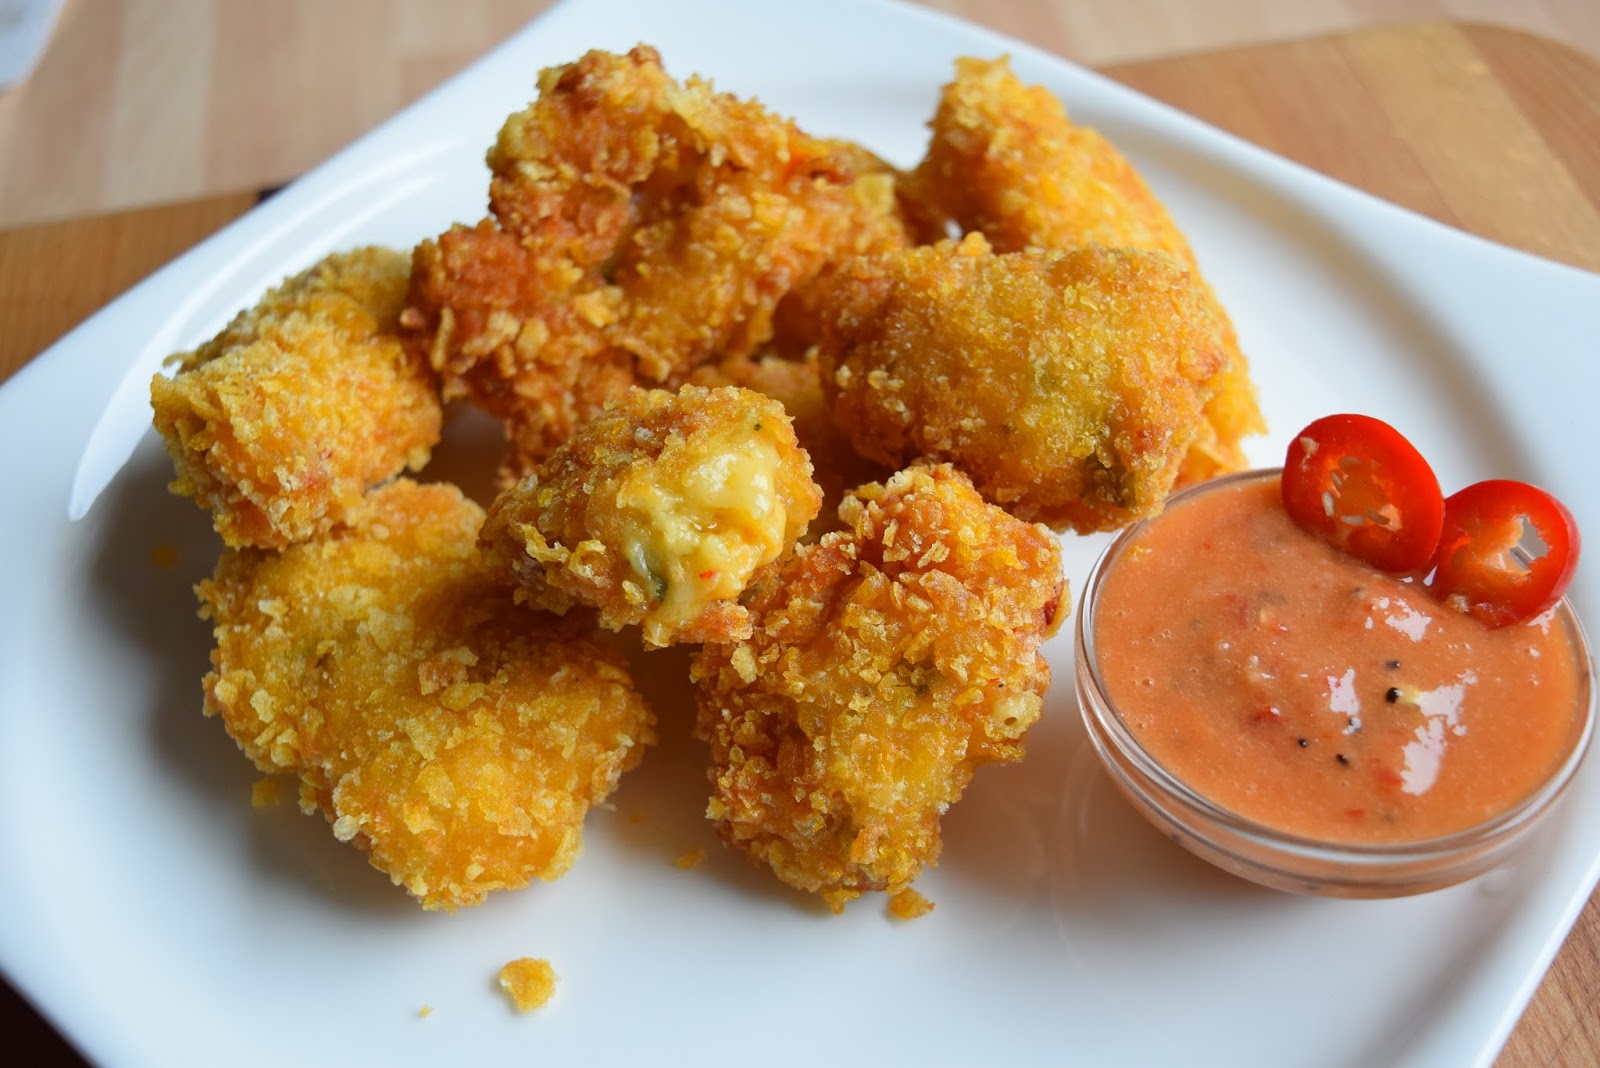 Vegan CooKing: Chili Cheese Nuggets